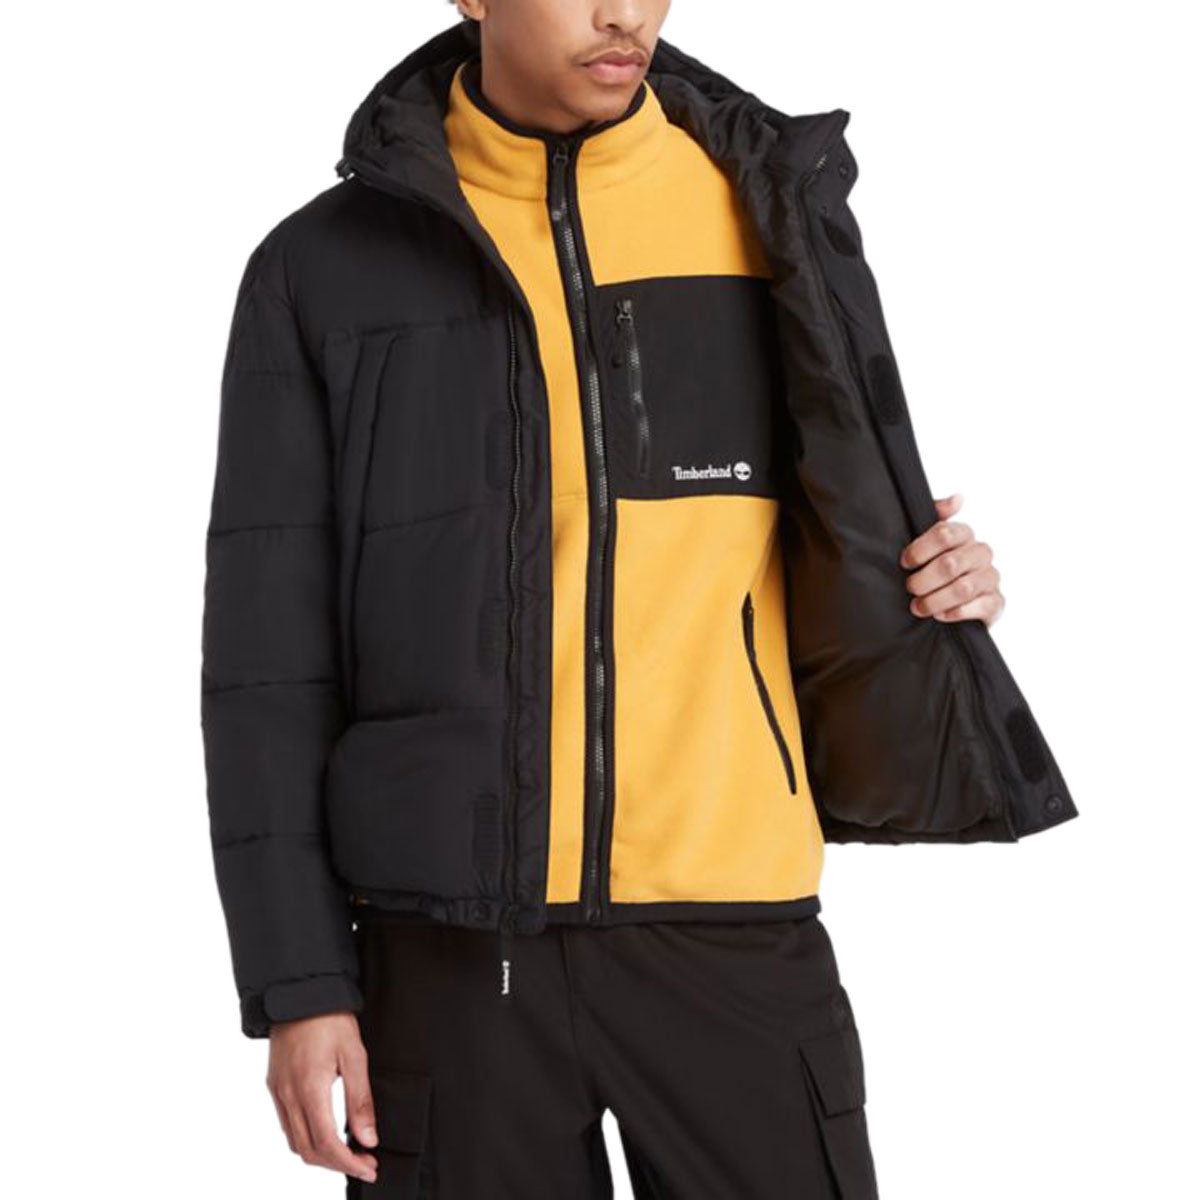 Timberland DWR Outdoor Archive Puffer Jacket - Black image 3